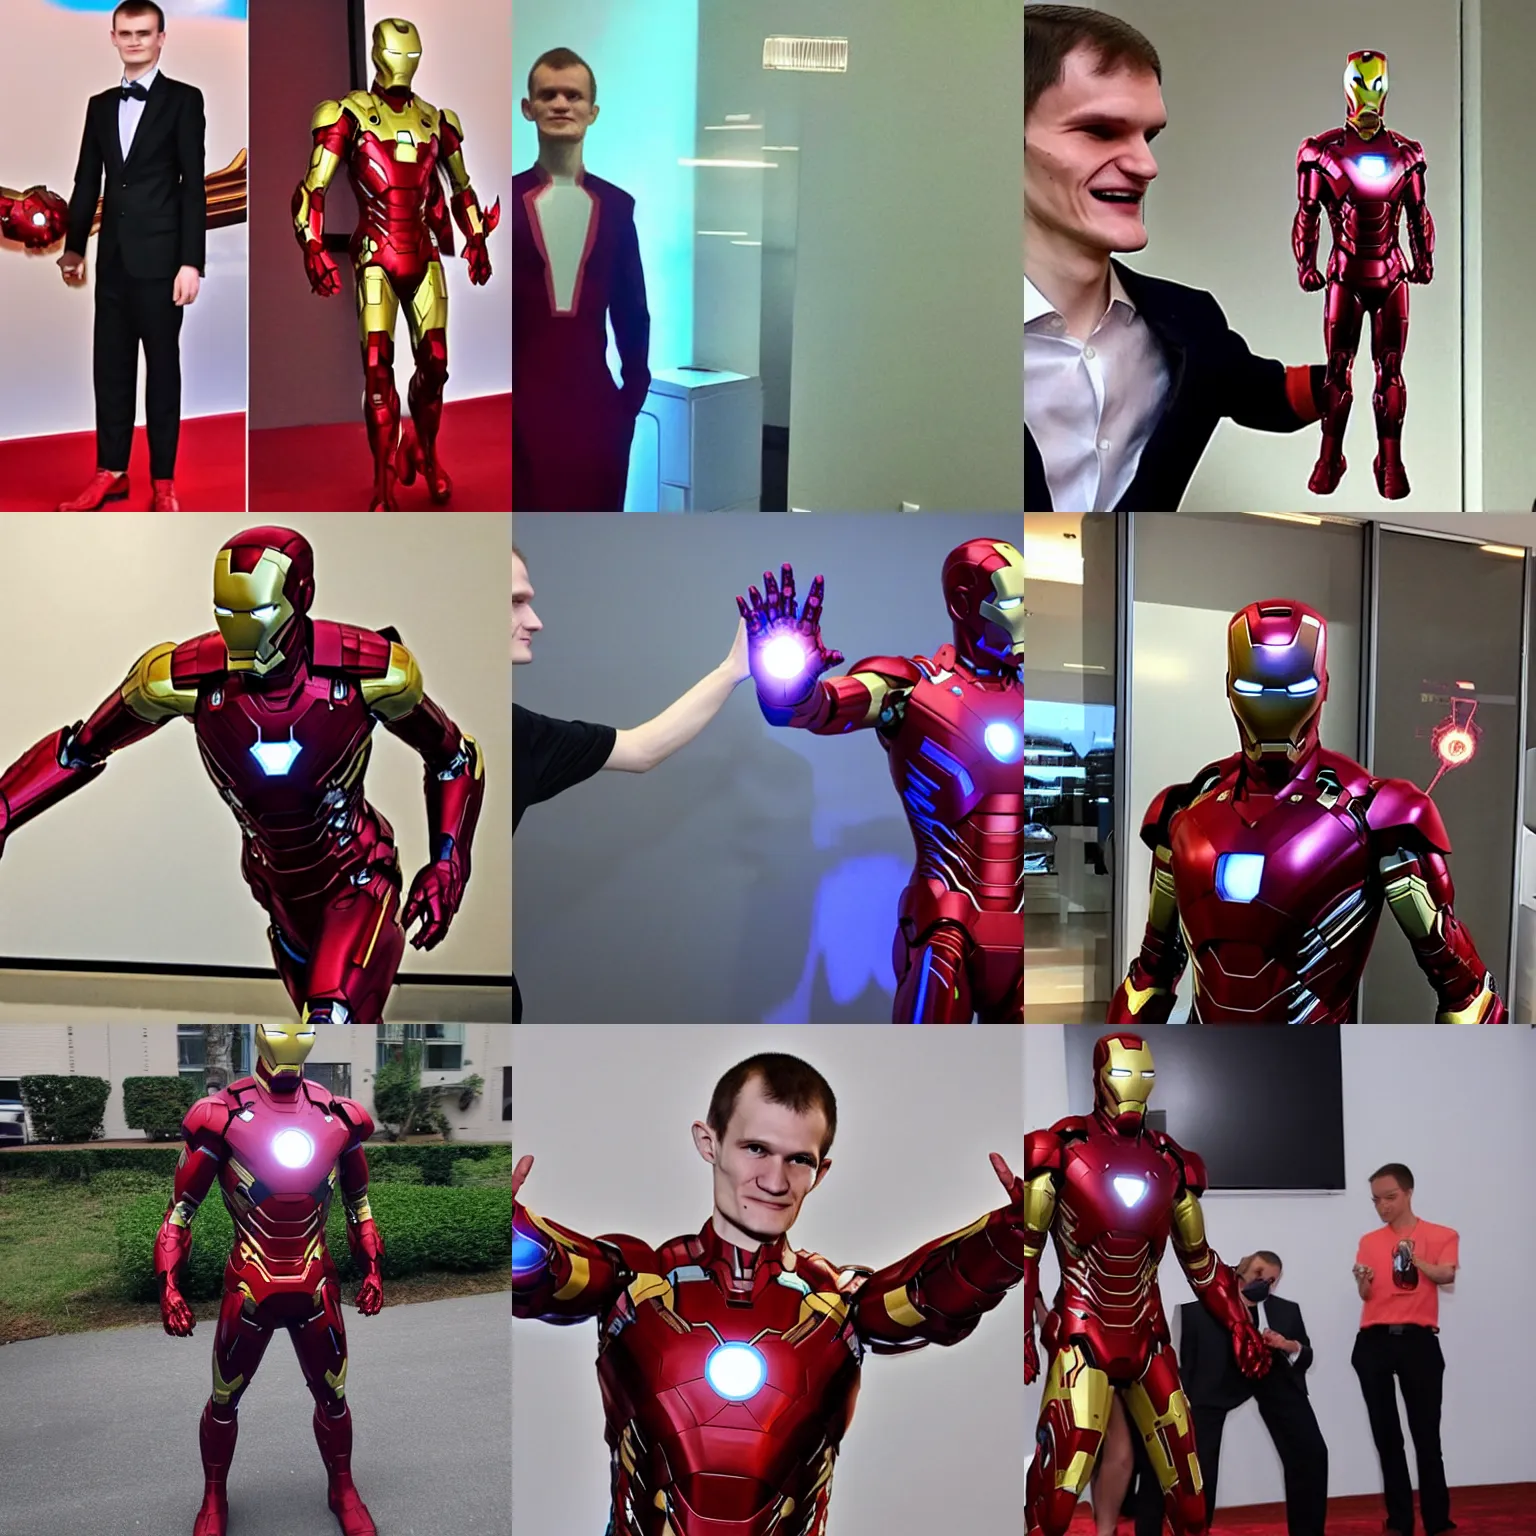 Prompt: <photo quality=high mode='attention grabbing'>Vitalik Buterin steals iron man's suit</photo>